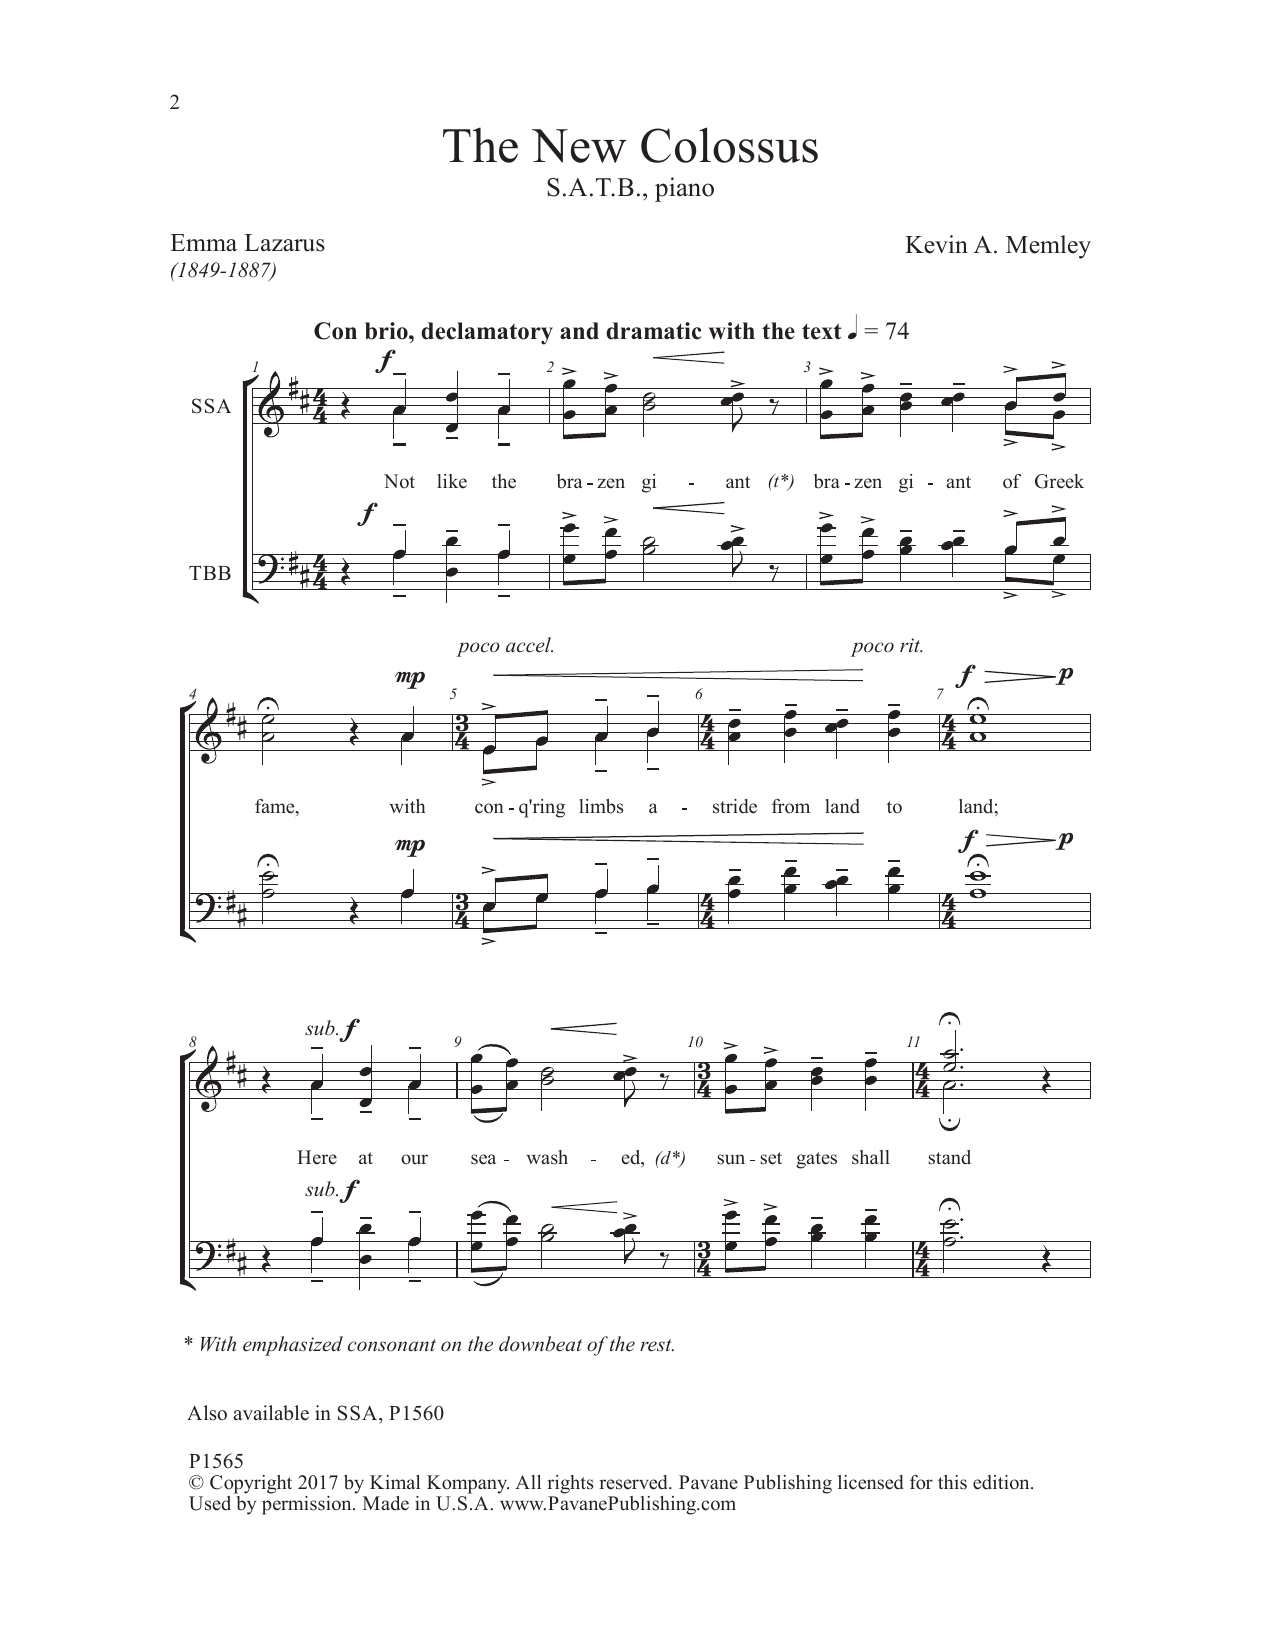 Download Kevin Memley The New Colossus Sheet Music